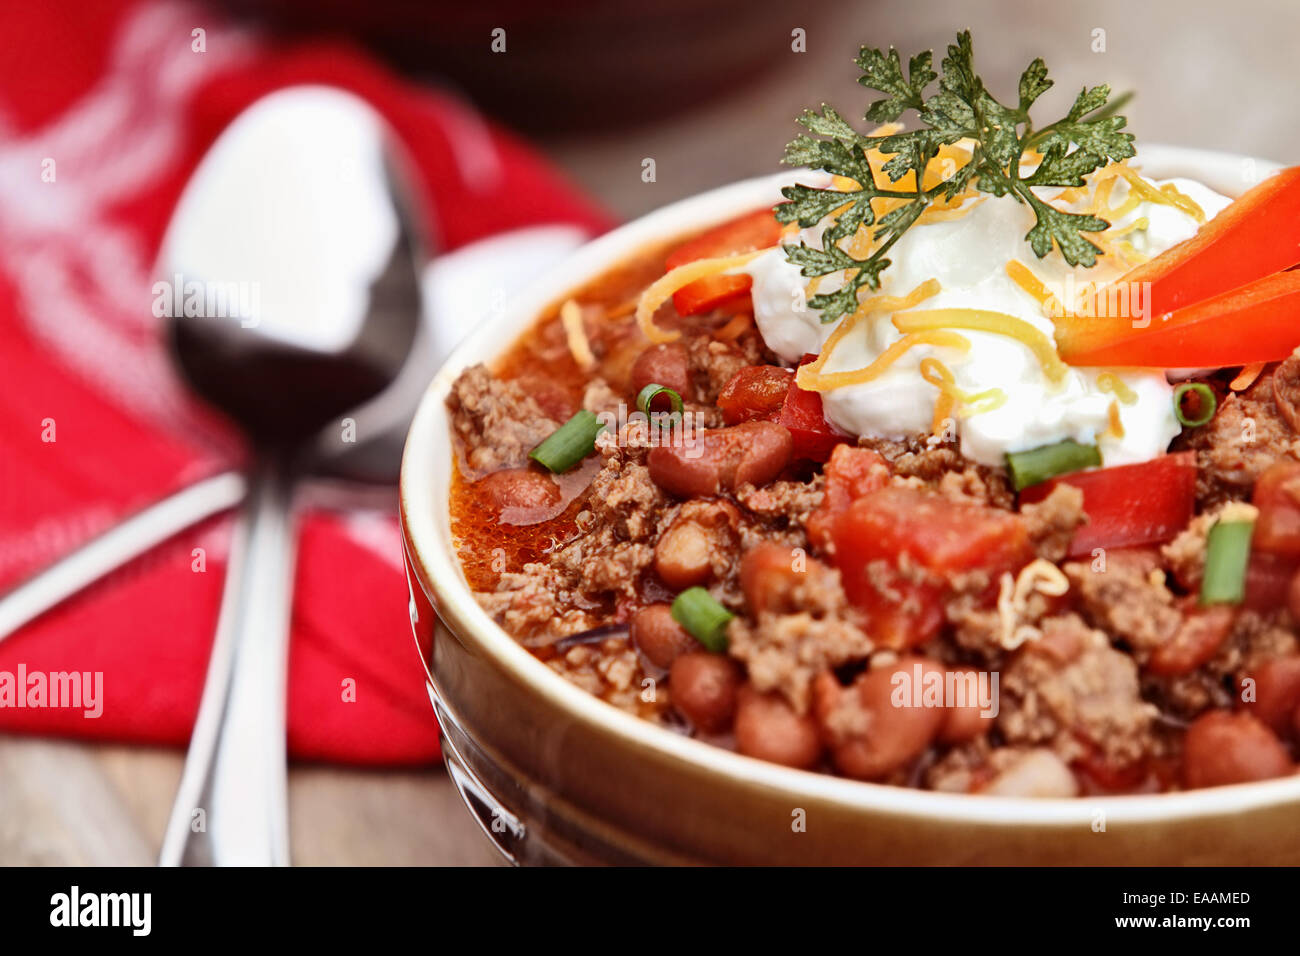 Bowl of Chili Con Carne garnished with sour cream, chives and cheddar cheese. Shallow depth of field with selective focus. Stock Photo